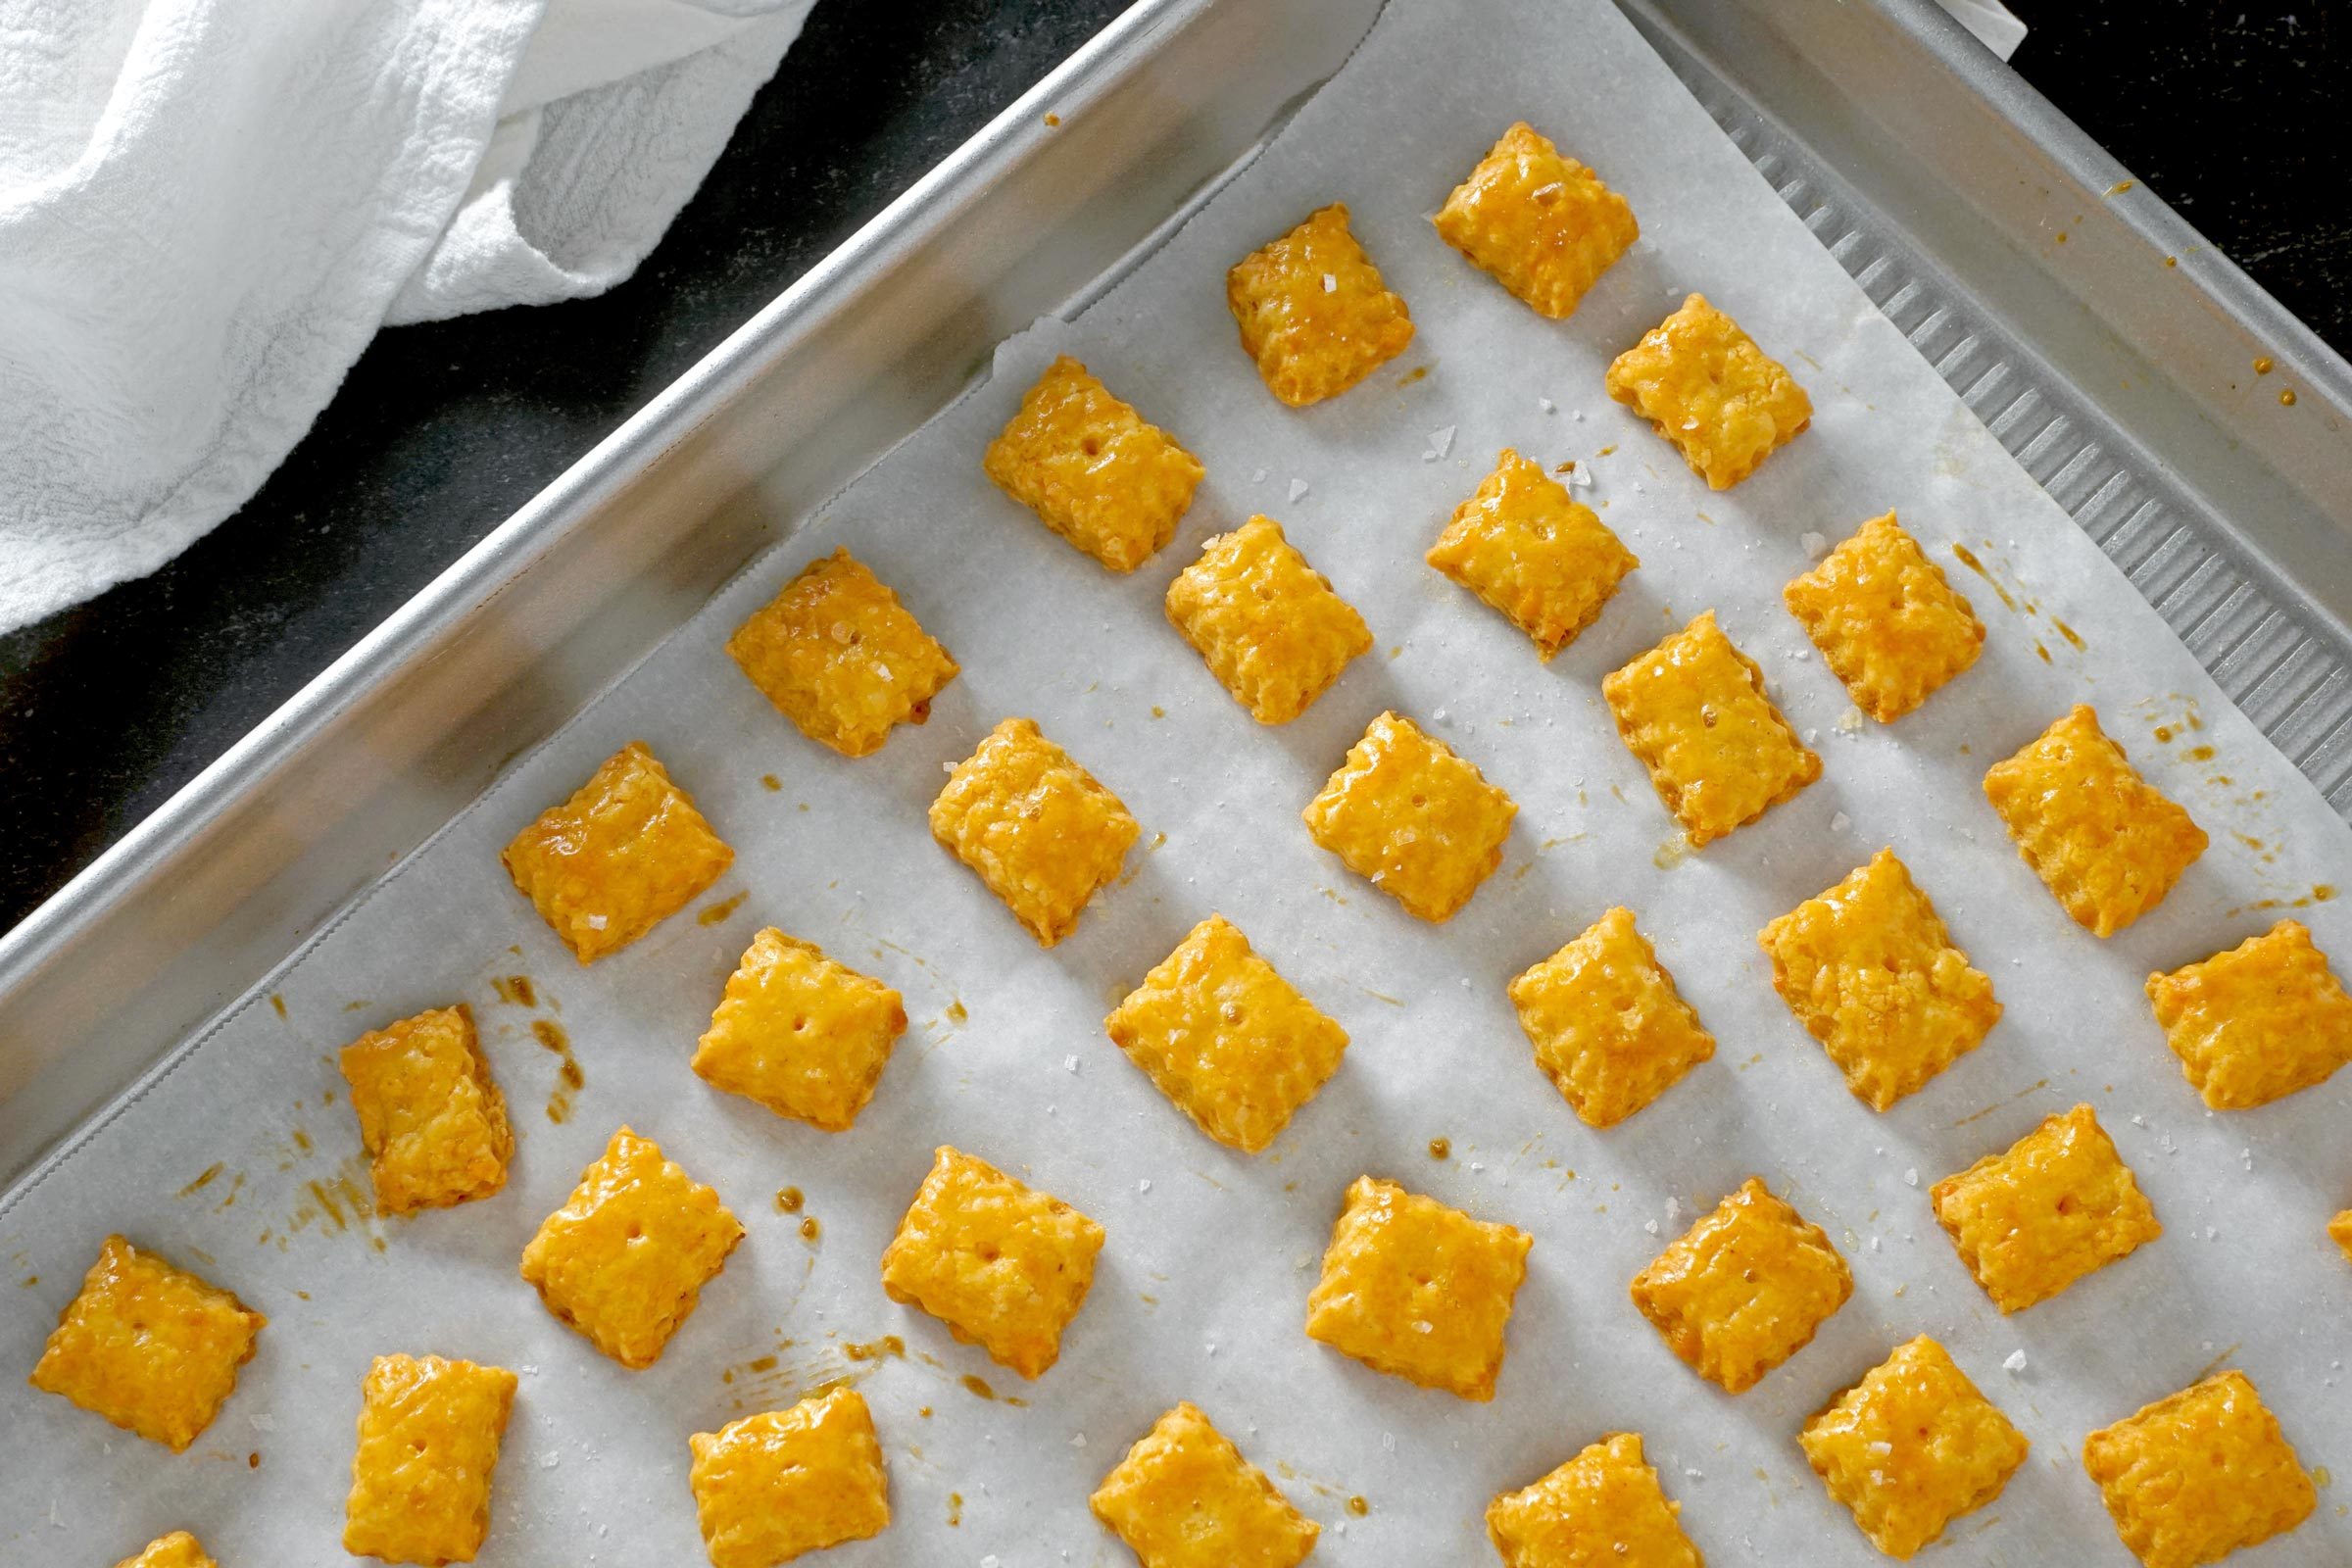 Baking Sheet with Homemade Cheez Its